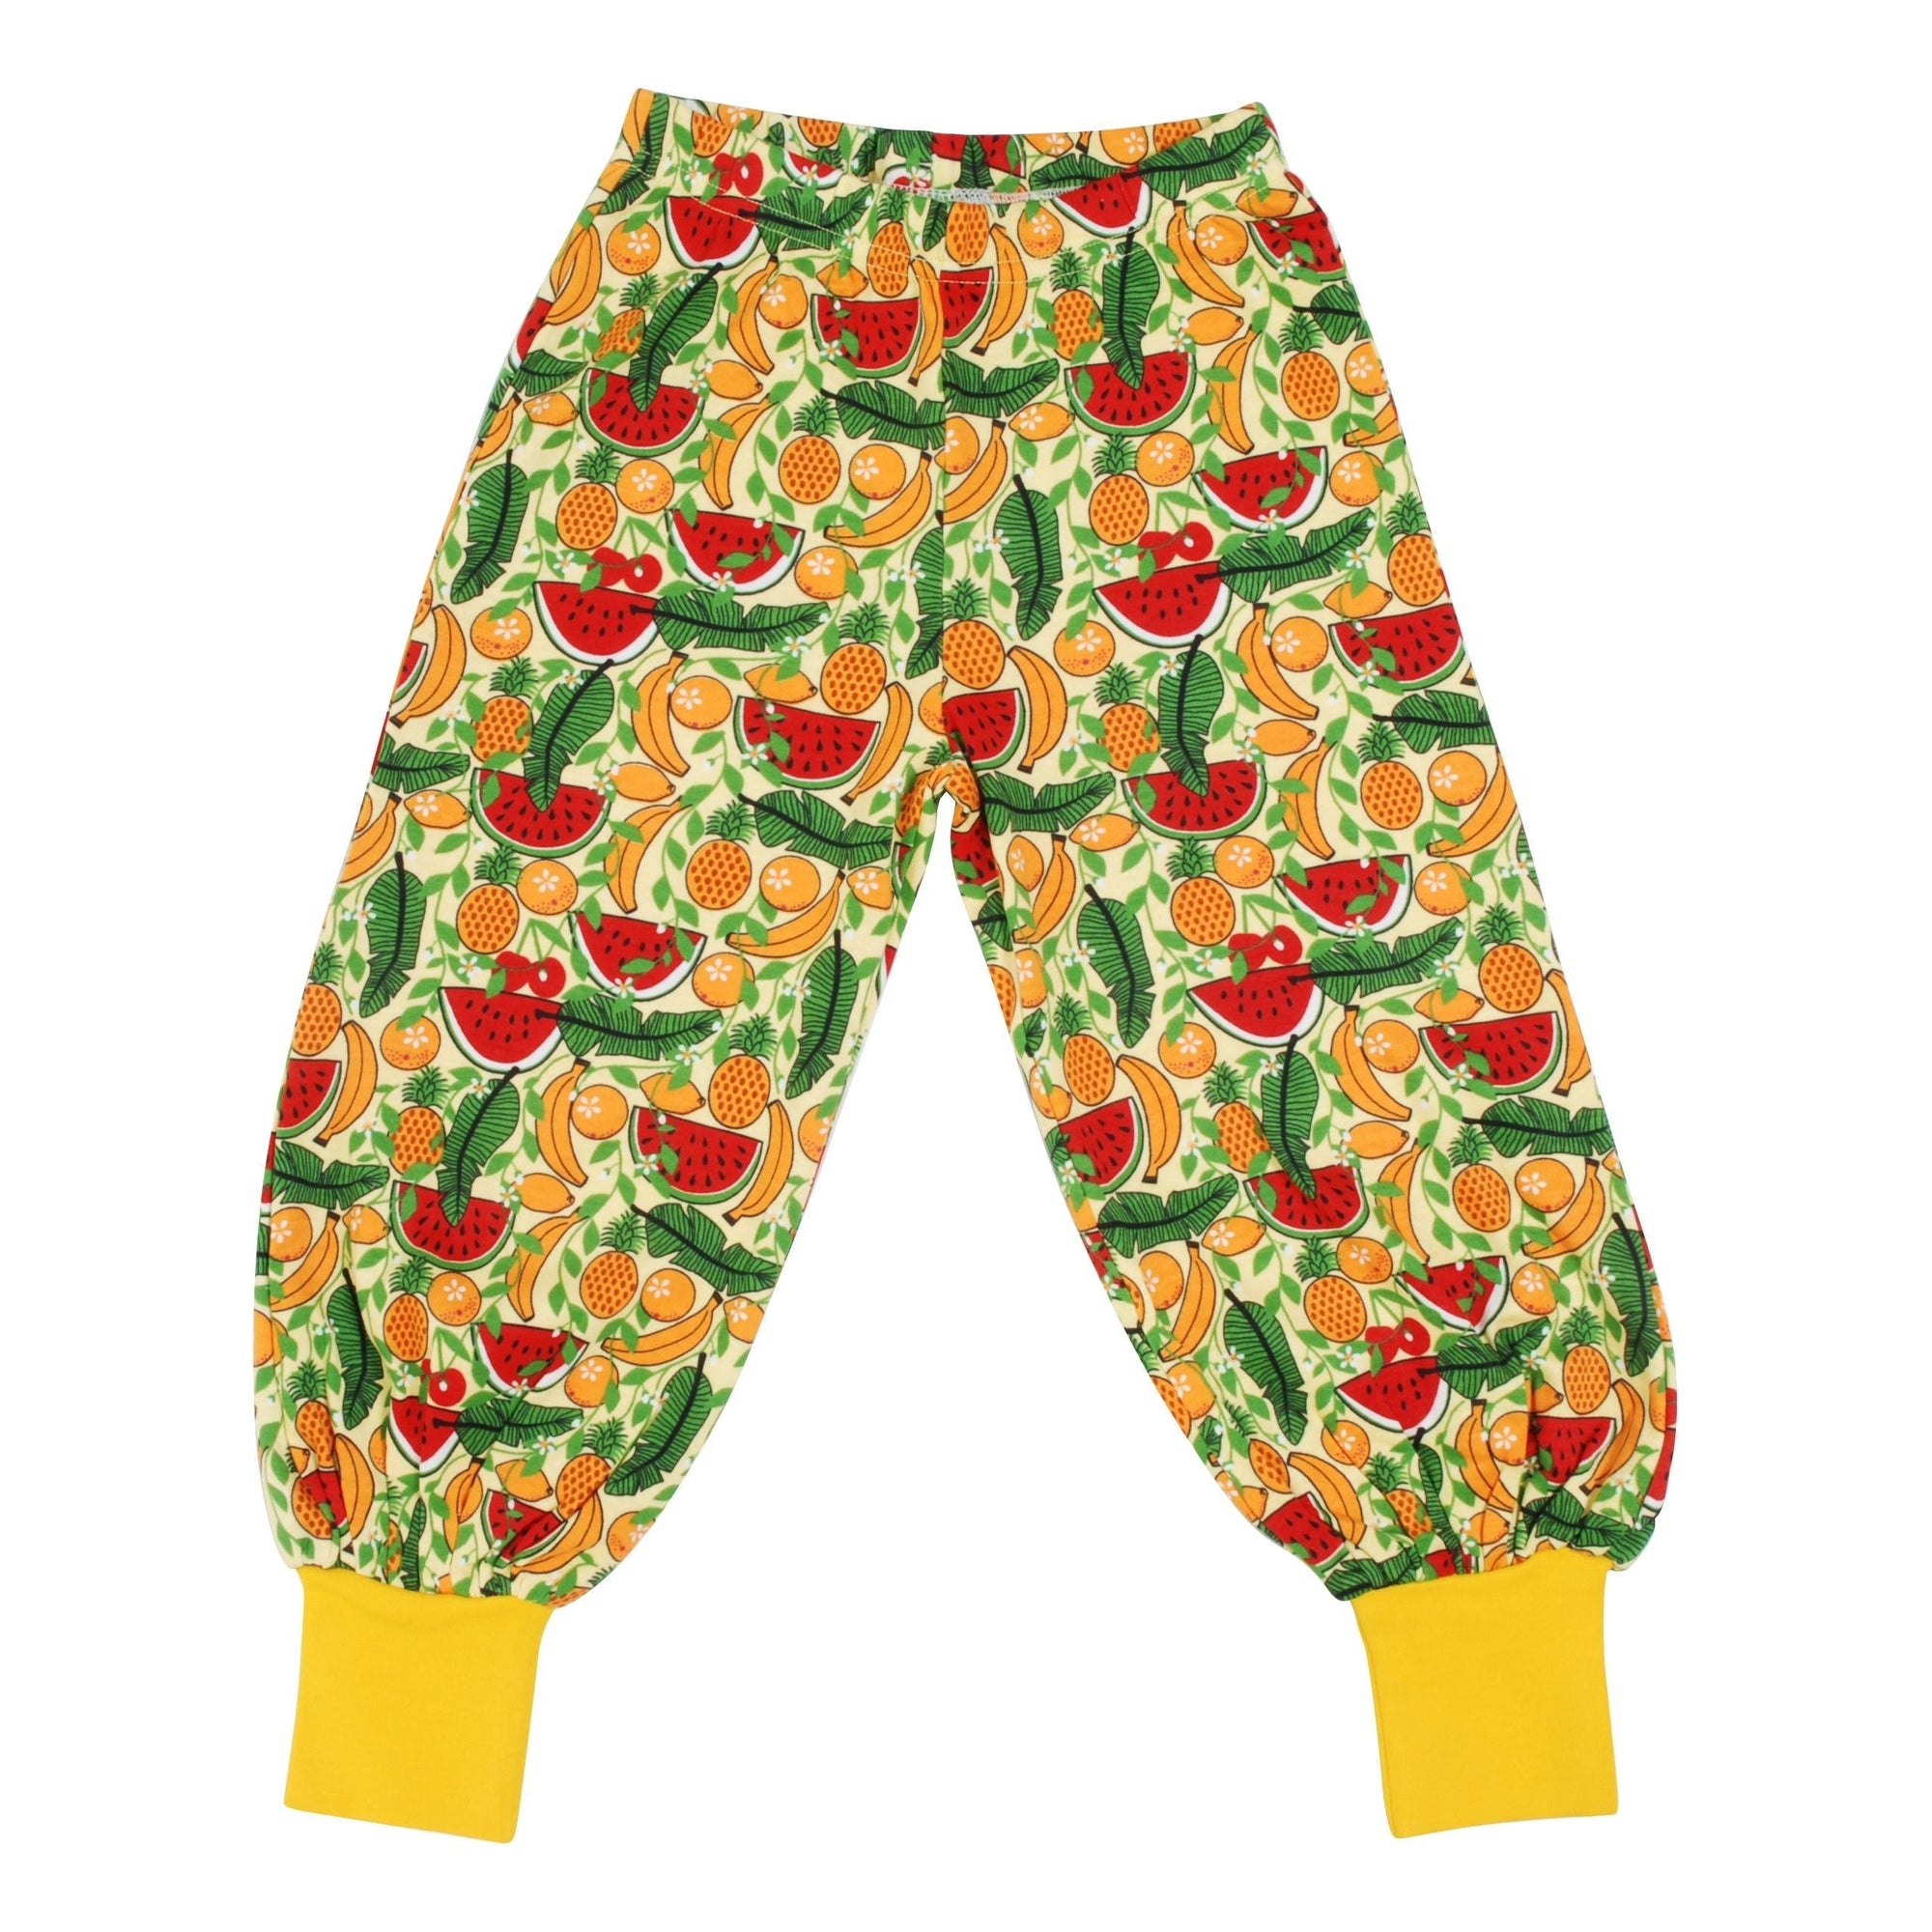 Tropical Baggy Pants - 2 Left Size 8-10 & 10-12 years-Duns Sweden-Modern Rascals